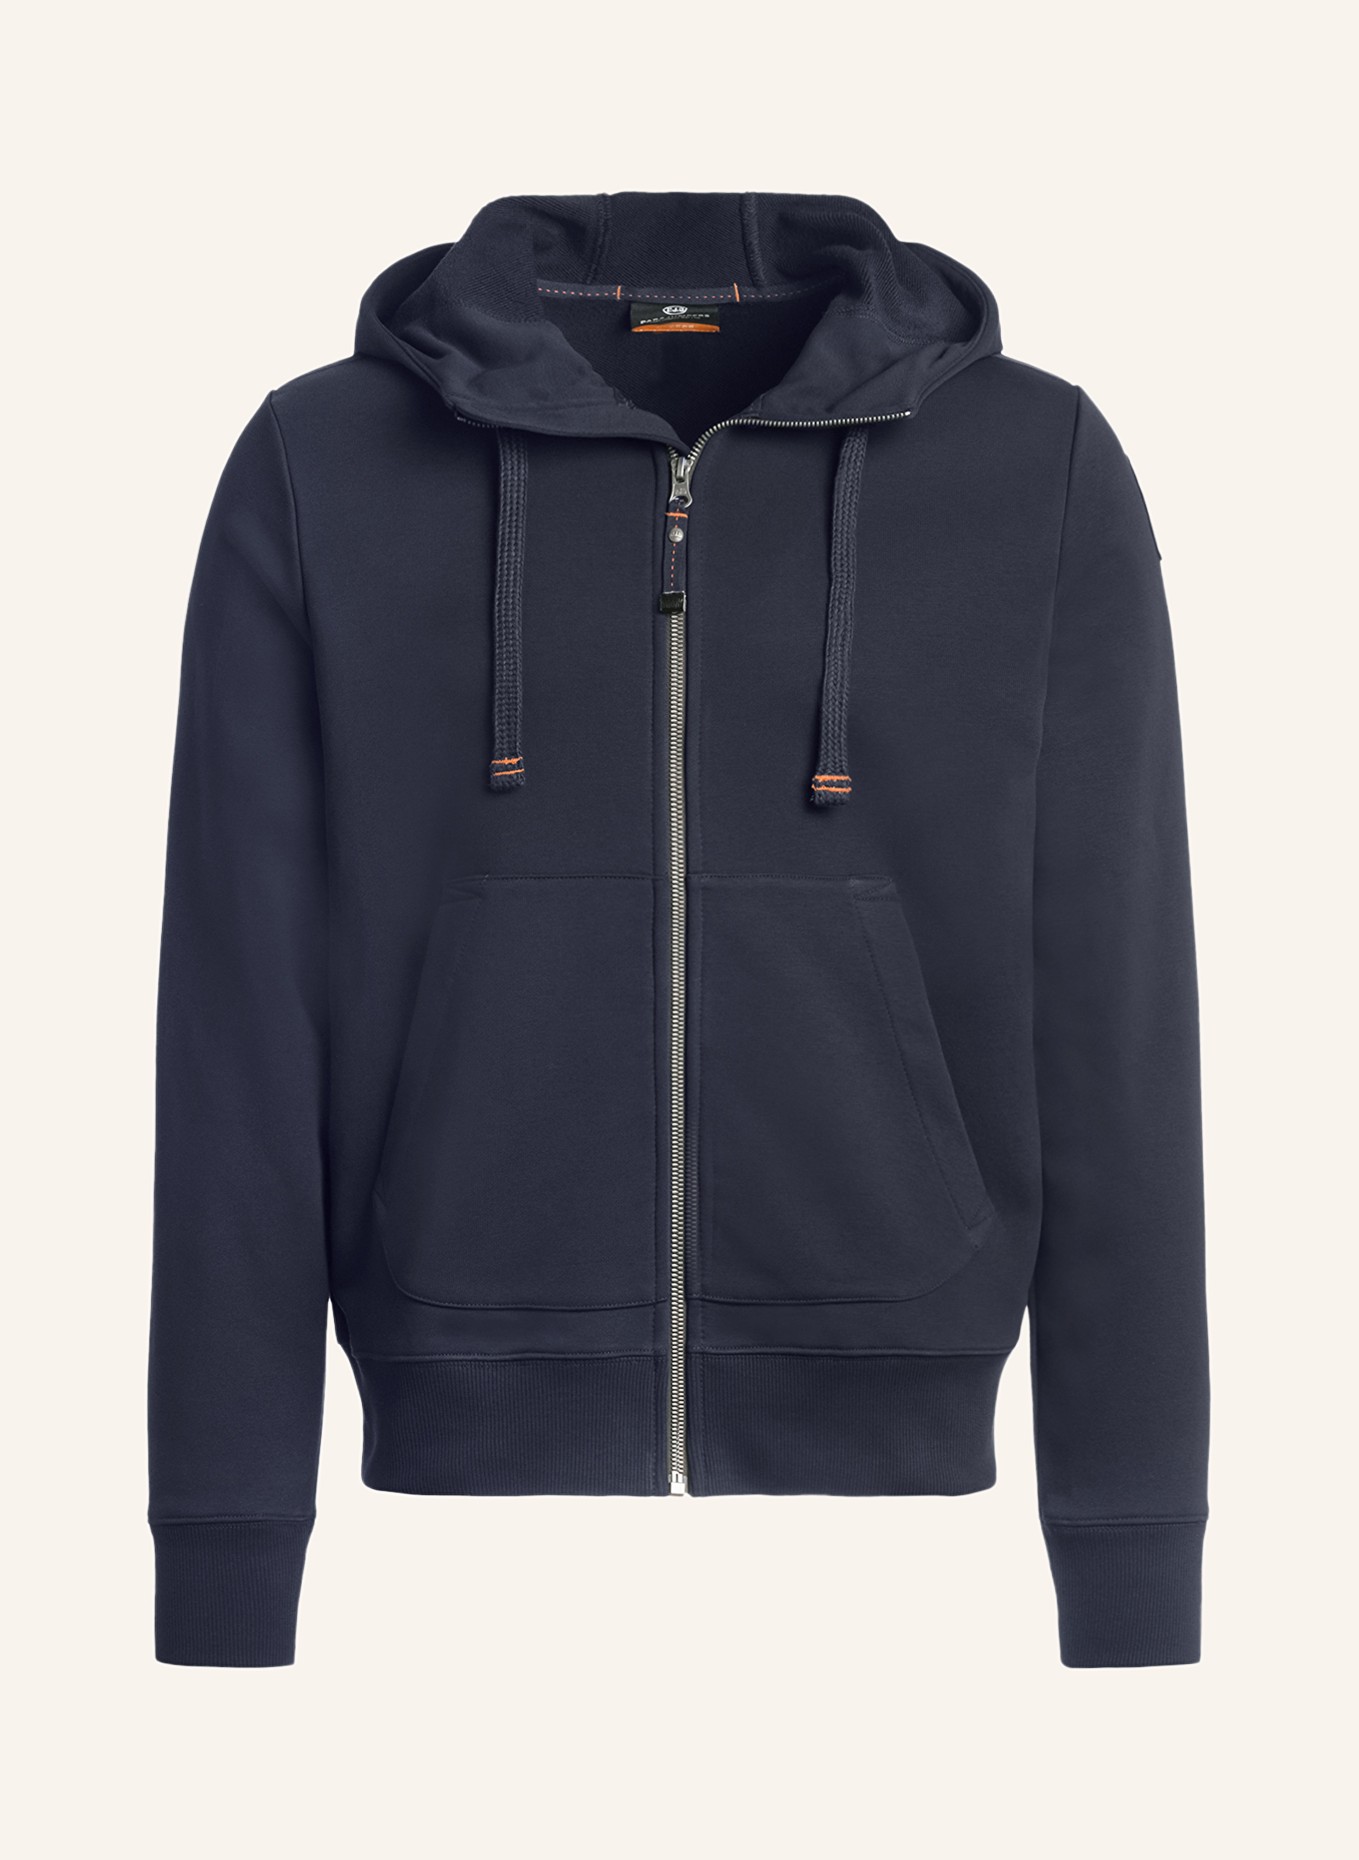 PARAJUMPERS Sweatjacke CHARLIE EASY, Farbe: 0316 blue navy (Bild 1)